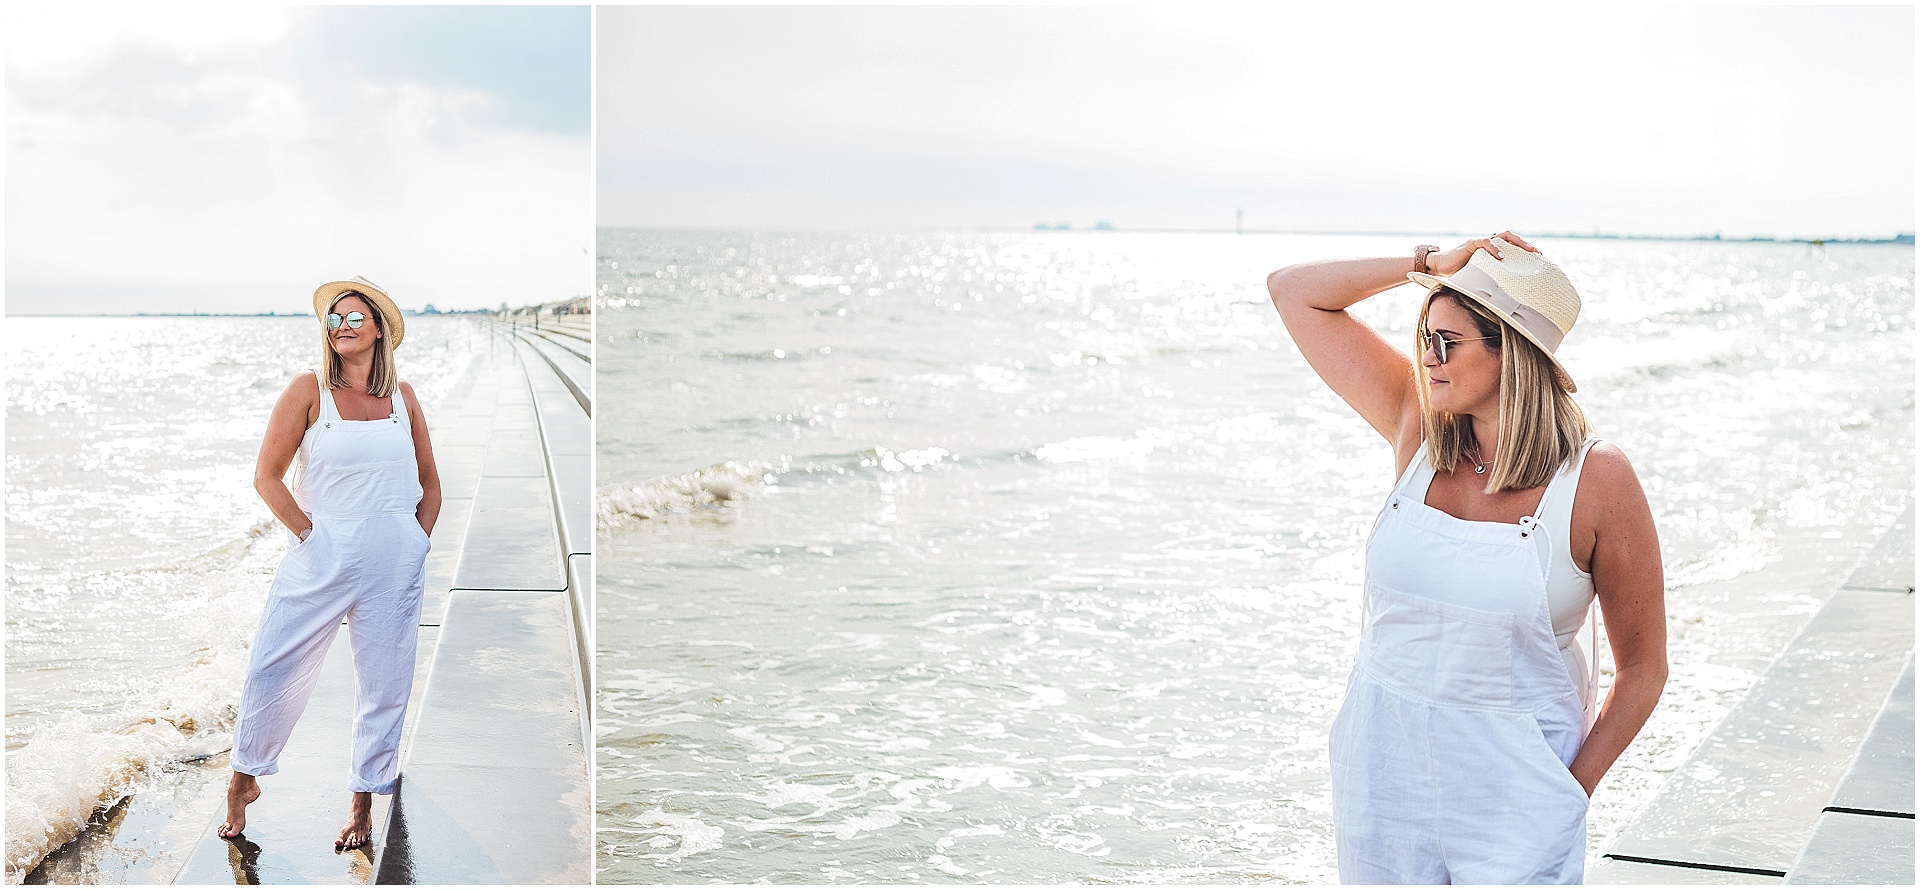 summer brand shoot images by London brand photographer AKP Branding Stories